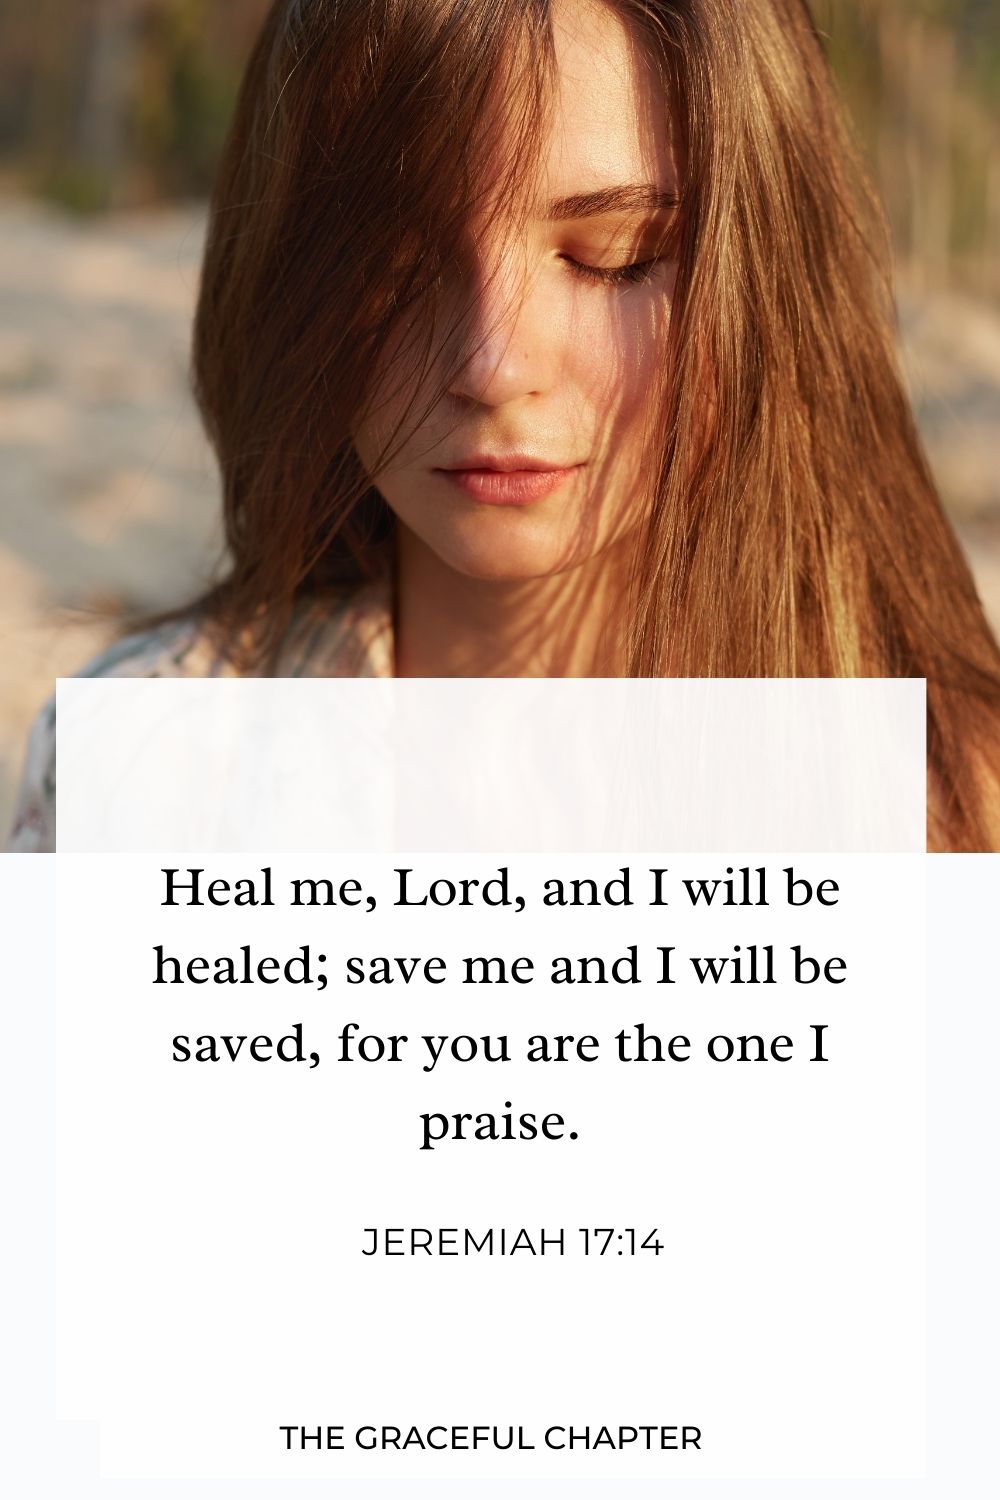 Heal me, Lord, and I will be healed; save me and I will be saved, for you are the one I praise. Jeremiah 17:14